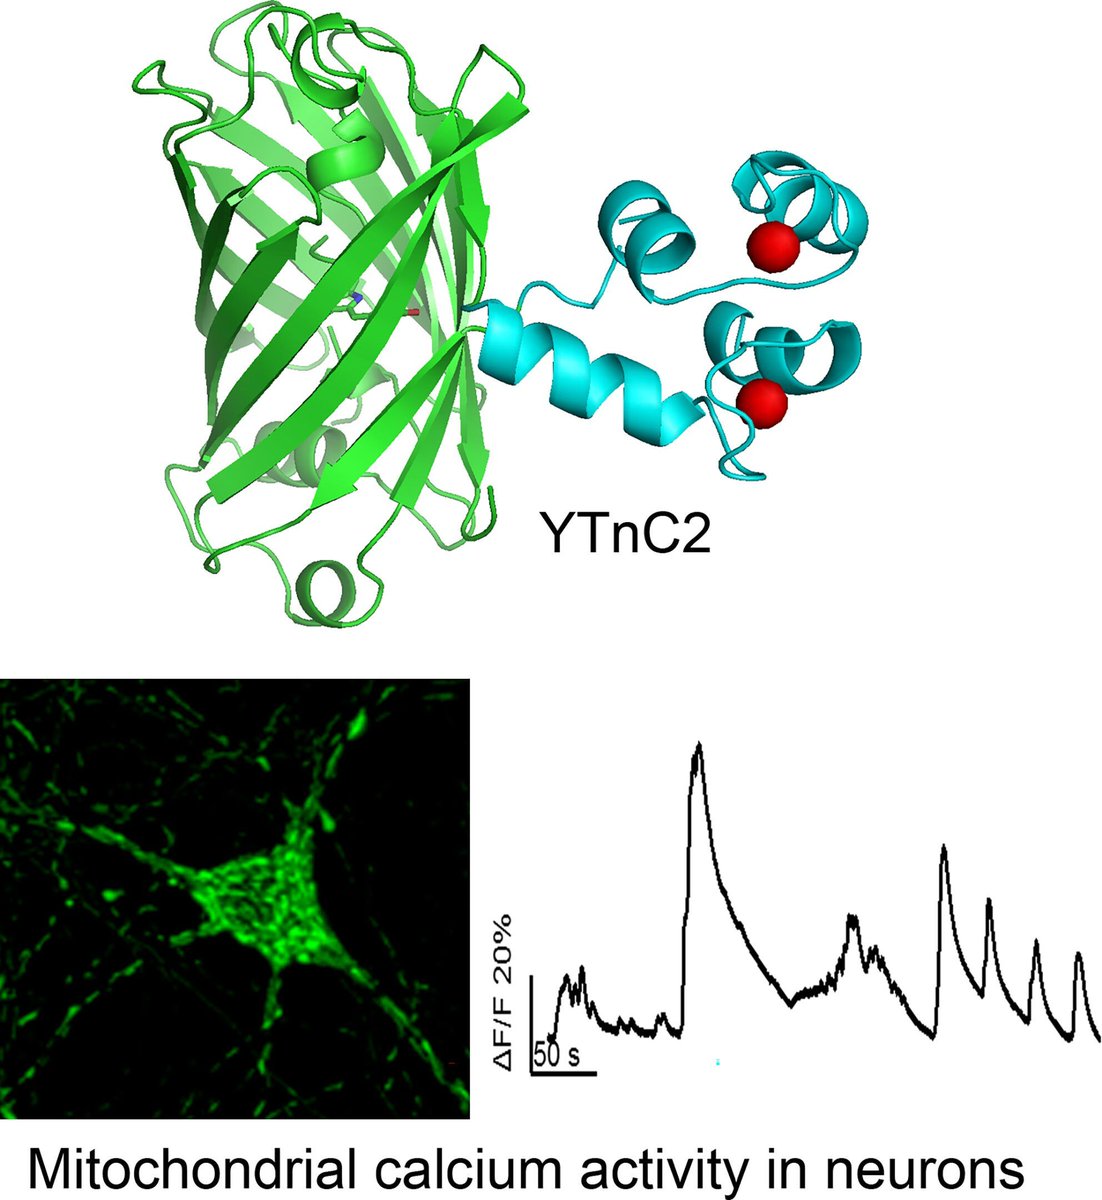 YTnC2, an improved genetically encoded green calcium indicator based on toadfish troponin C

▶️buff.ly/45ZrQBy

@PiatkevichL
#TroponinC #Biotechnology
#Mitochondria #Neuroscience
#CrystalStructure #CalciumImaging